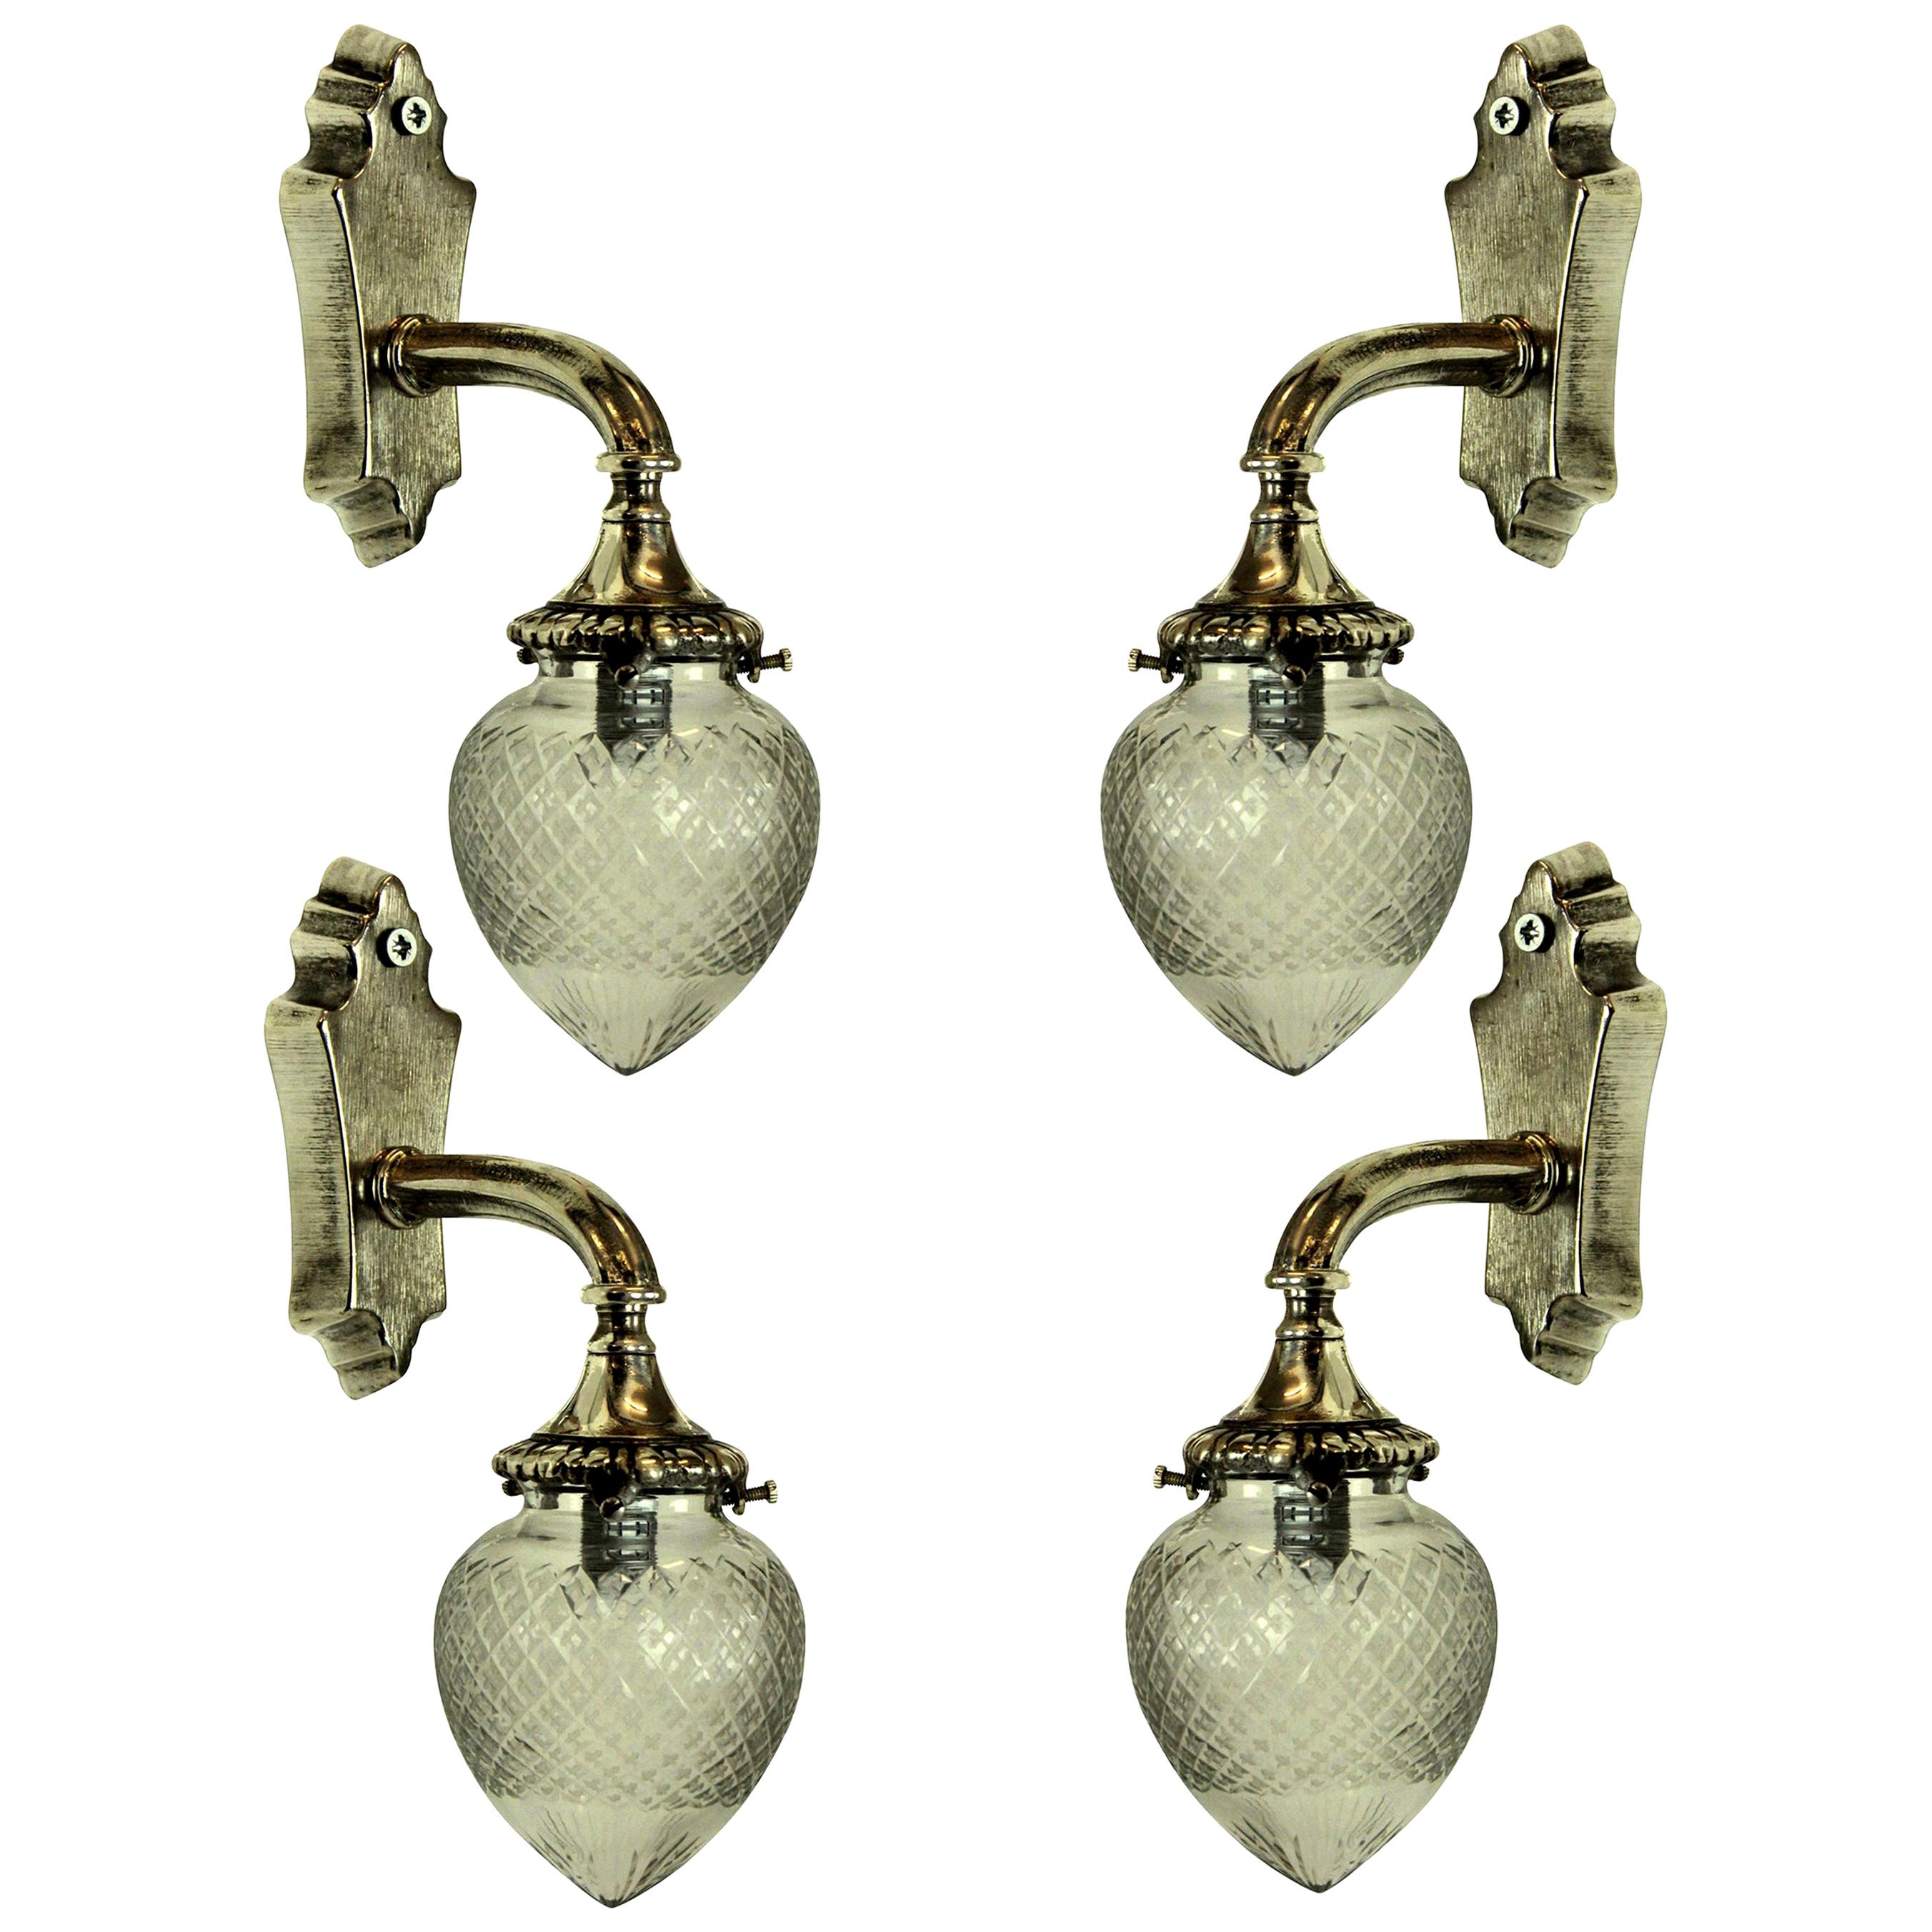 Set of Four Silver Bracket Sconces with Glass Globe Shades